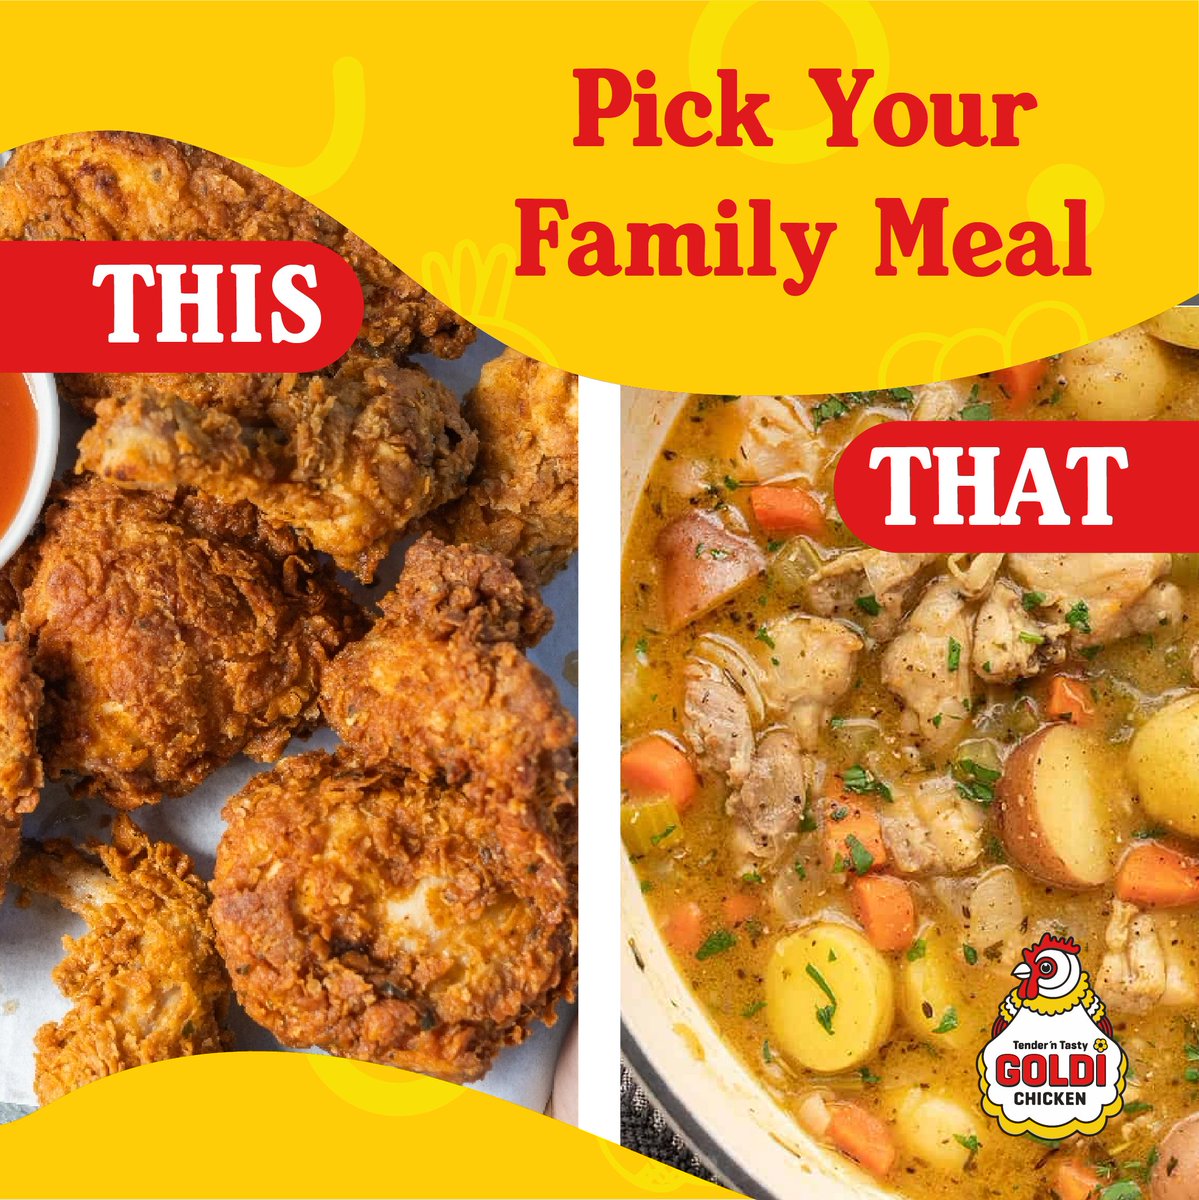 A long weekend spent with family always needs one thing, a Goldi Chicken meal! #GoldiChicken #AlwaysPartOfYourFamily